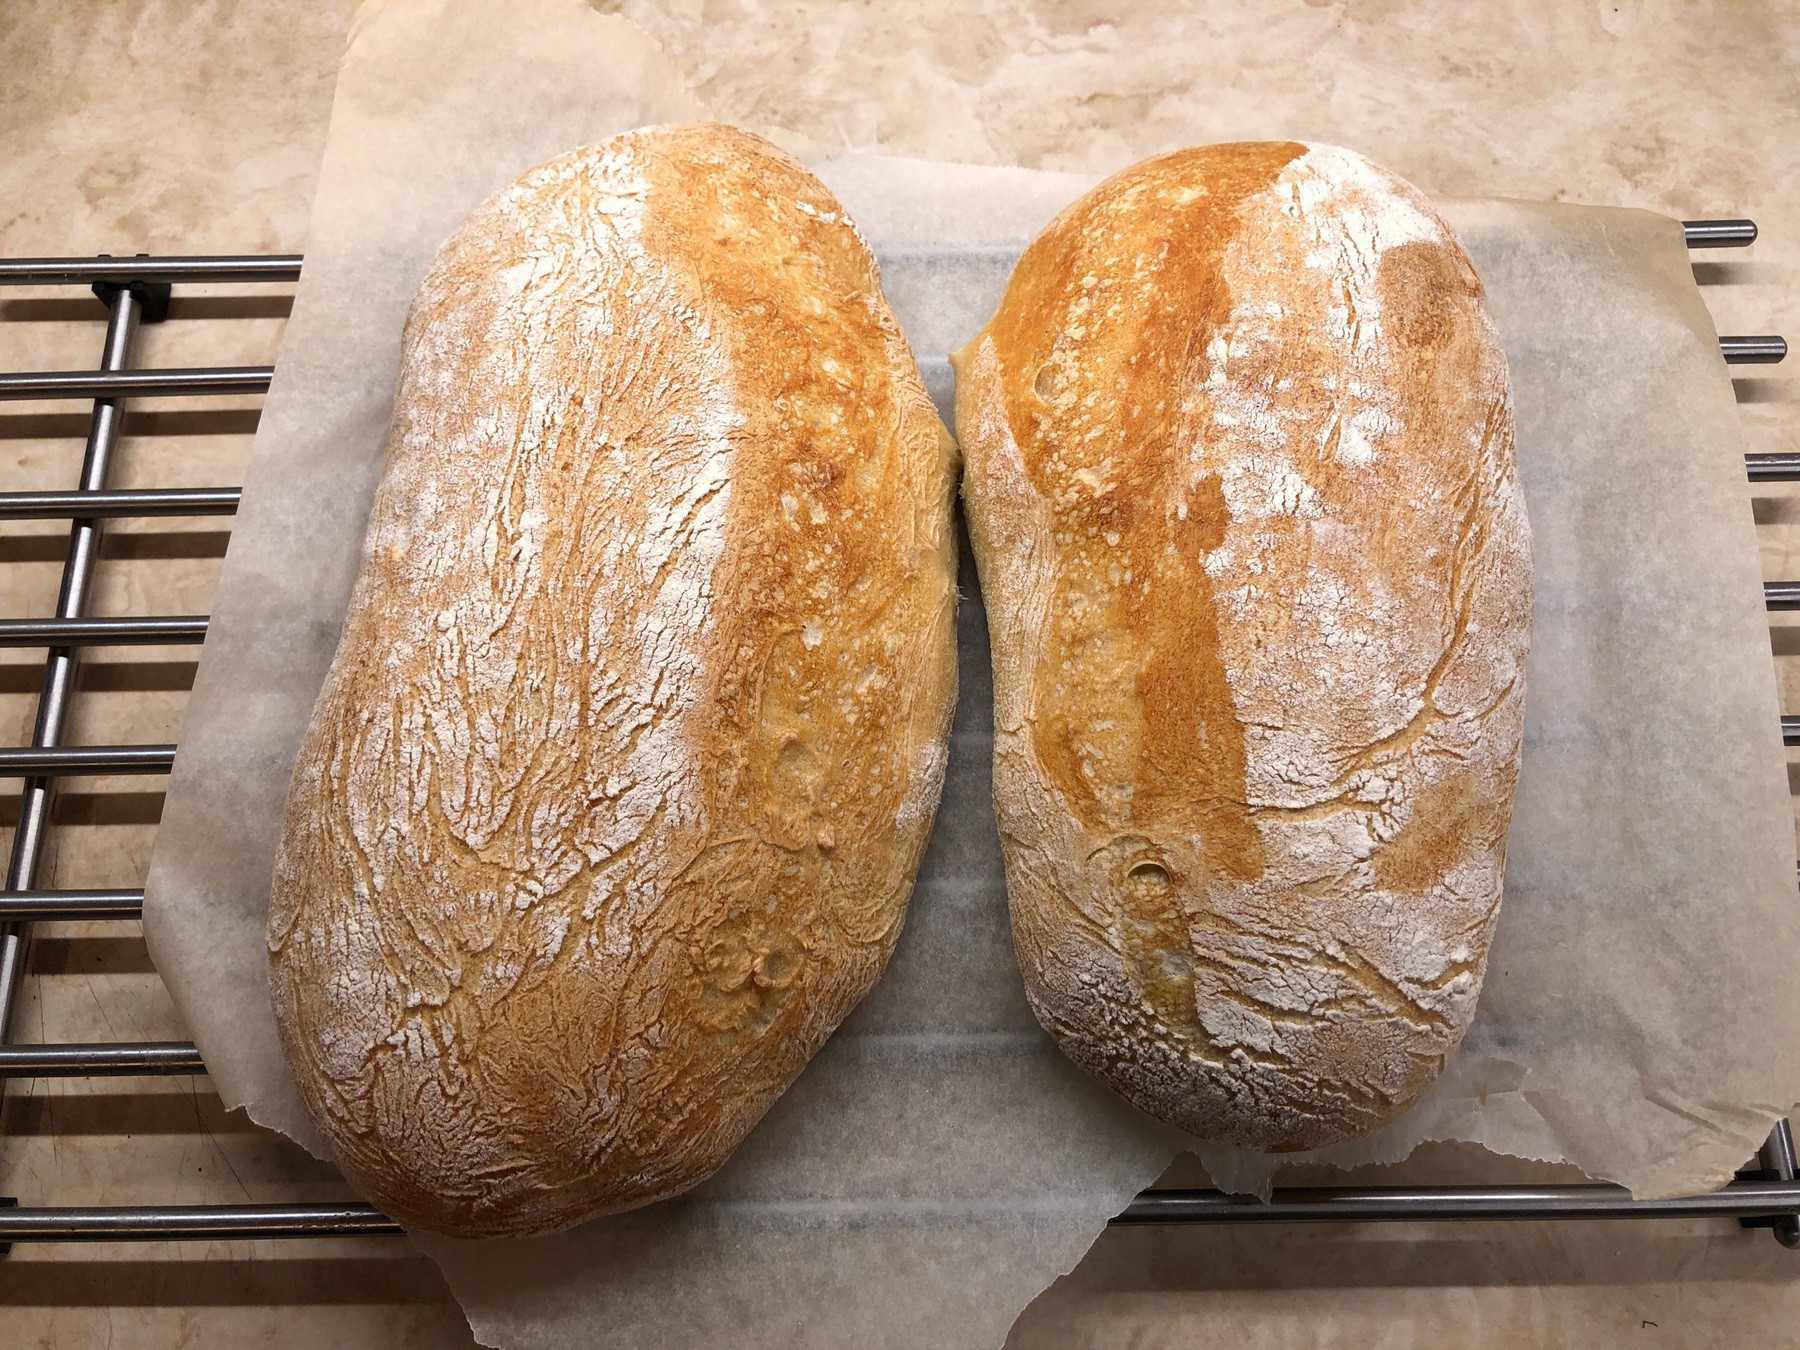 Two loaves of bread cooling.